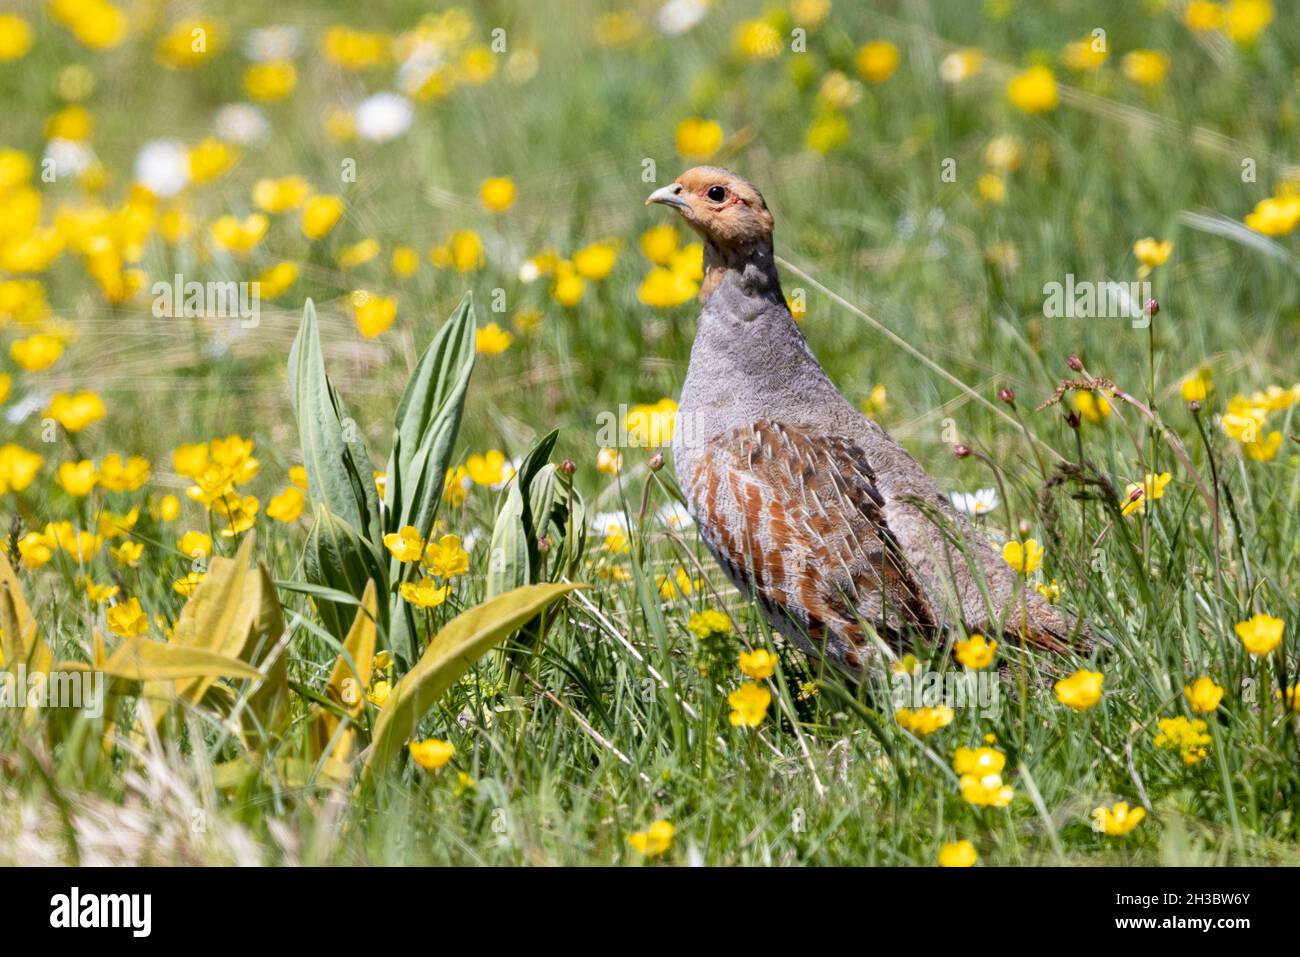 Grey Partridge (Perdix perdix), side view of an adult male standing in the grass, Abruzzo, Italy Stock Photo